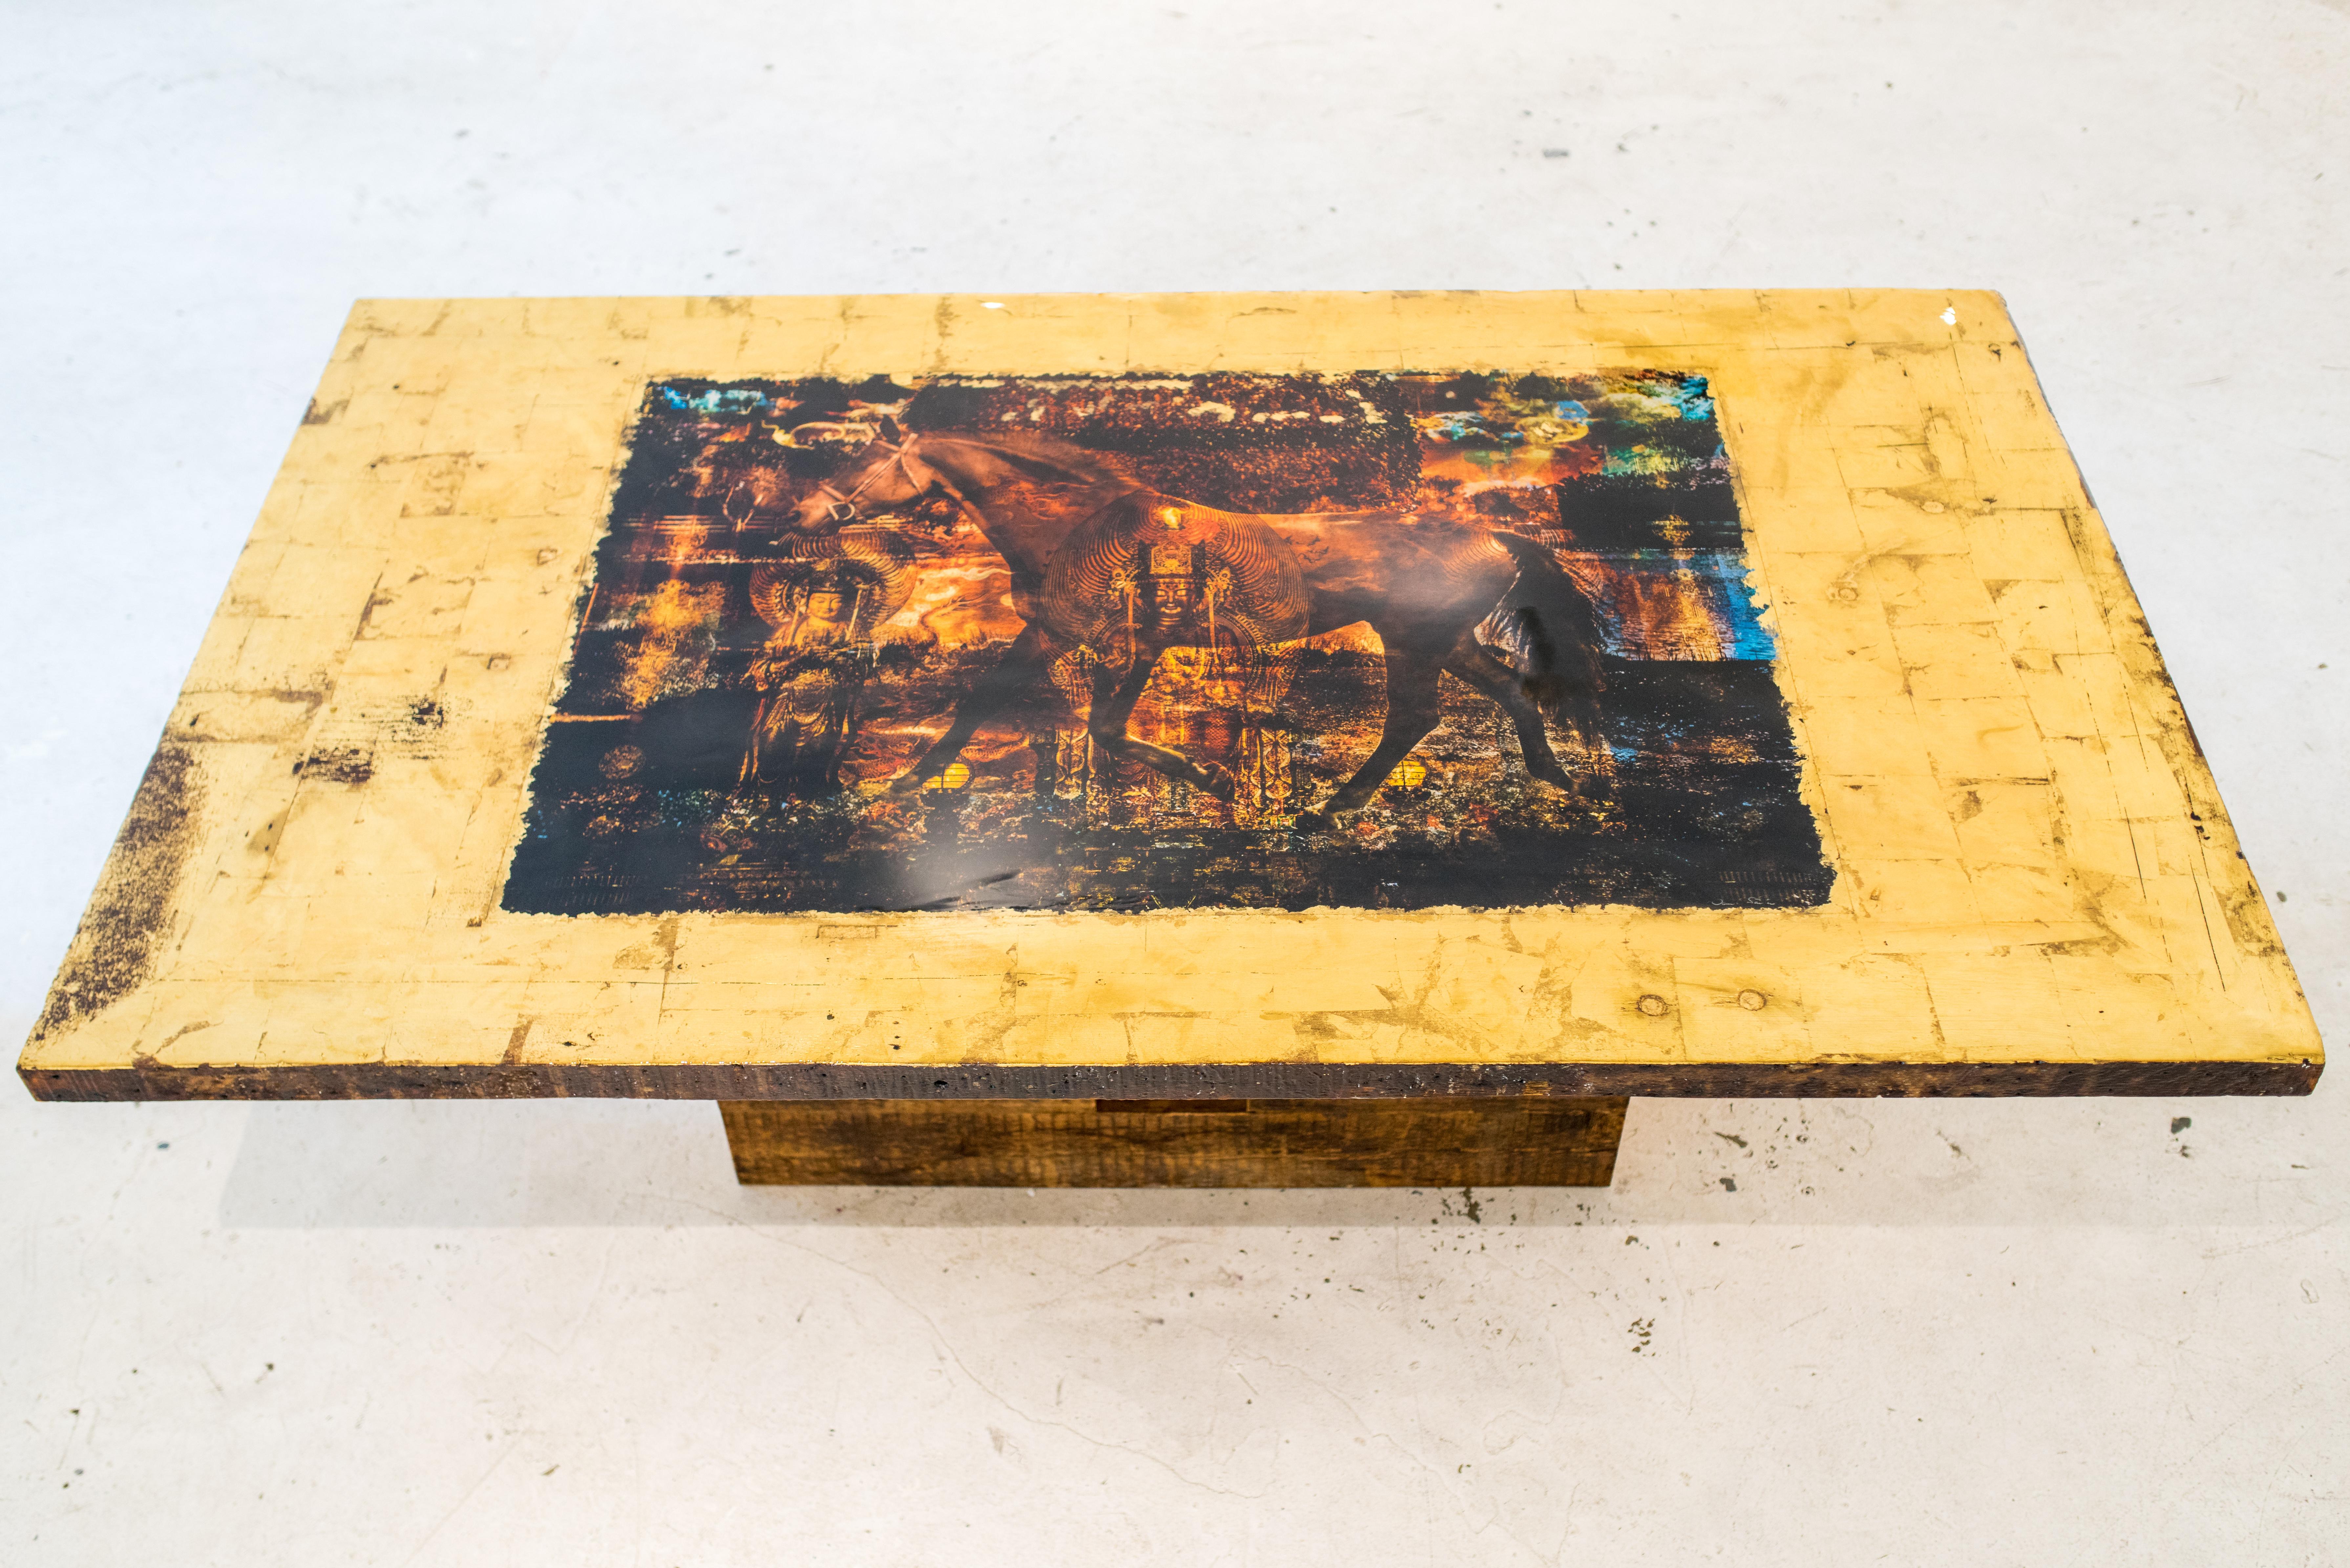 The Fascinasia Table was a collaborative work with Canadian artist Daniel Stanford. The artwork incorporated within the table is a unique blend of photography with collage elements and precise application of gold leaf, watercolor, Chinese ink,